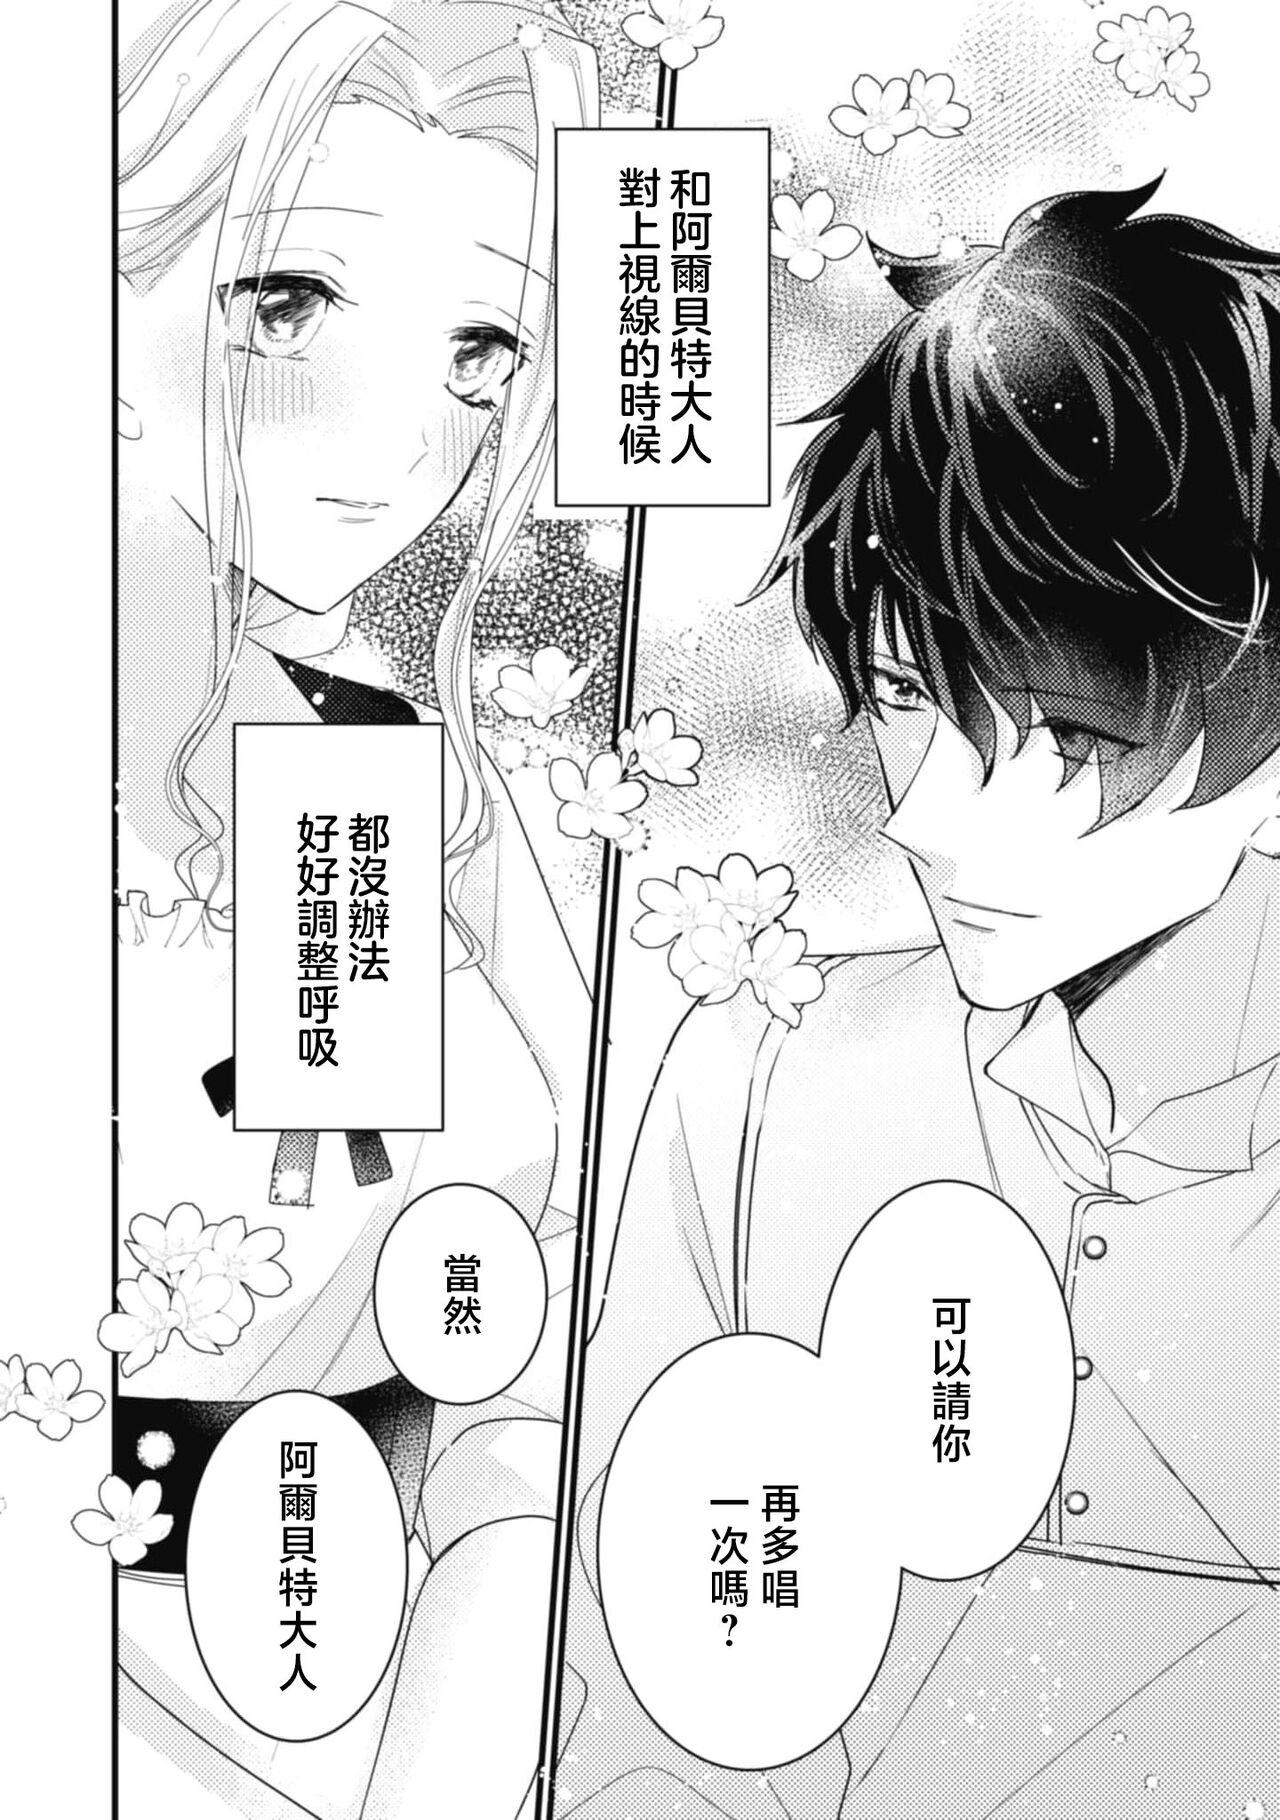 A shepherd in love with a demoted knight | 与被贬骑士相爱的牧羊女1 33